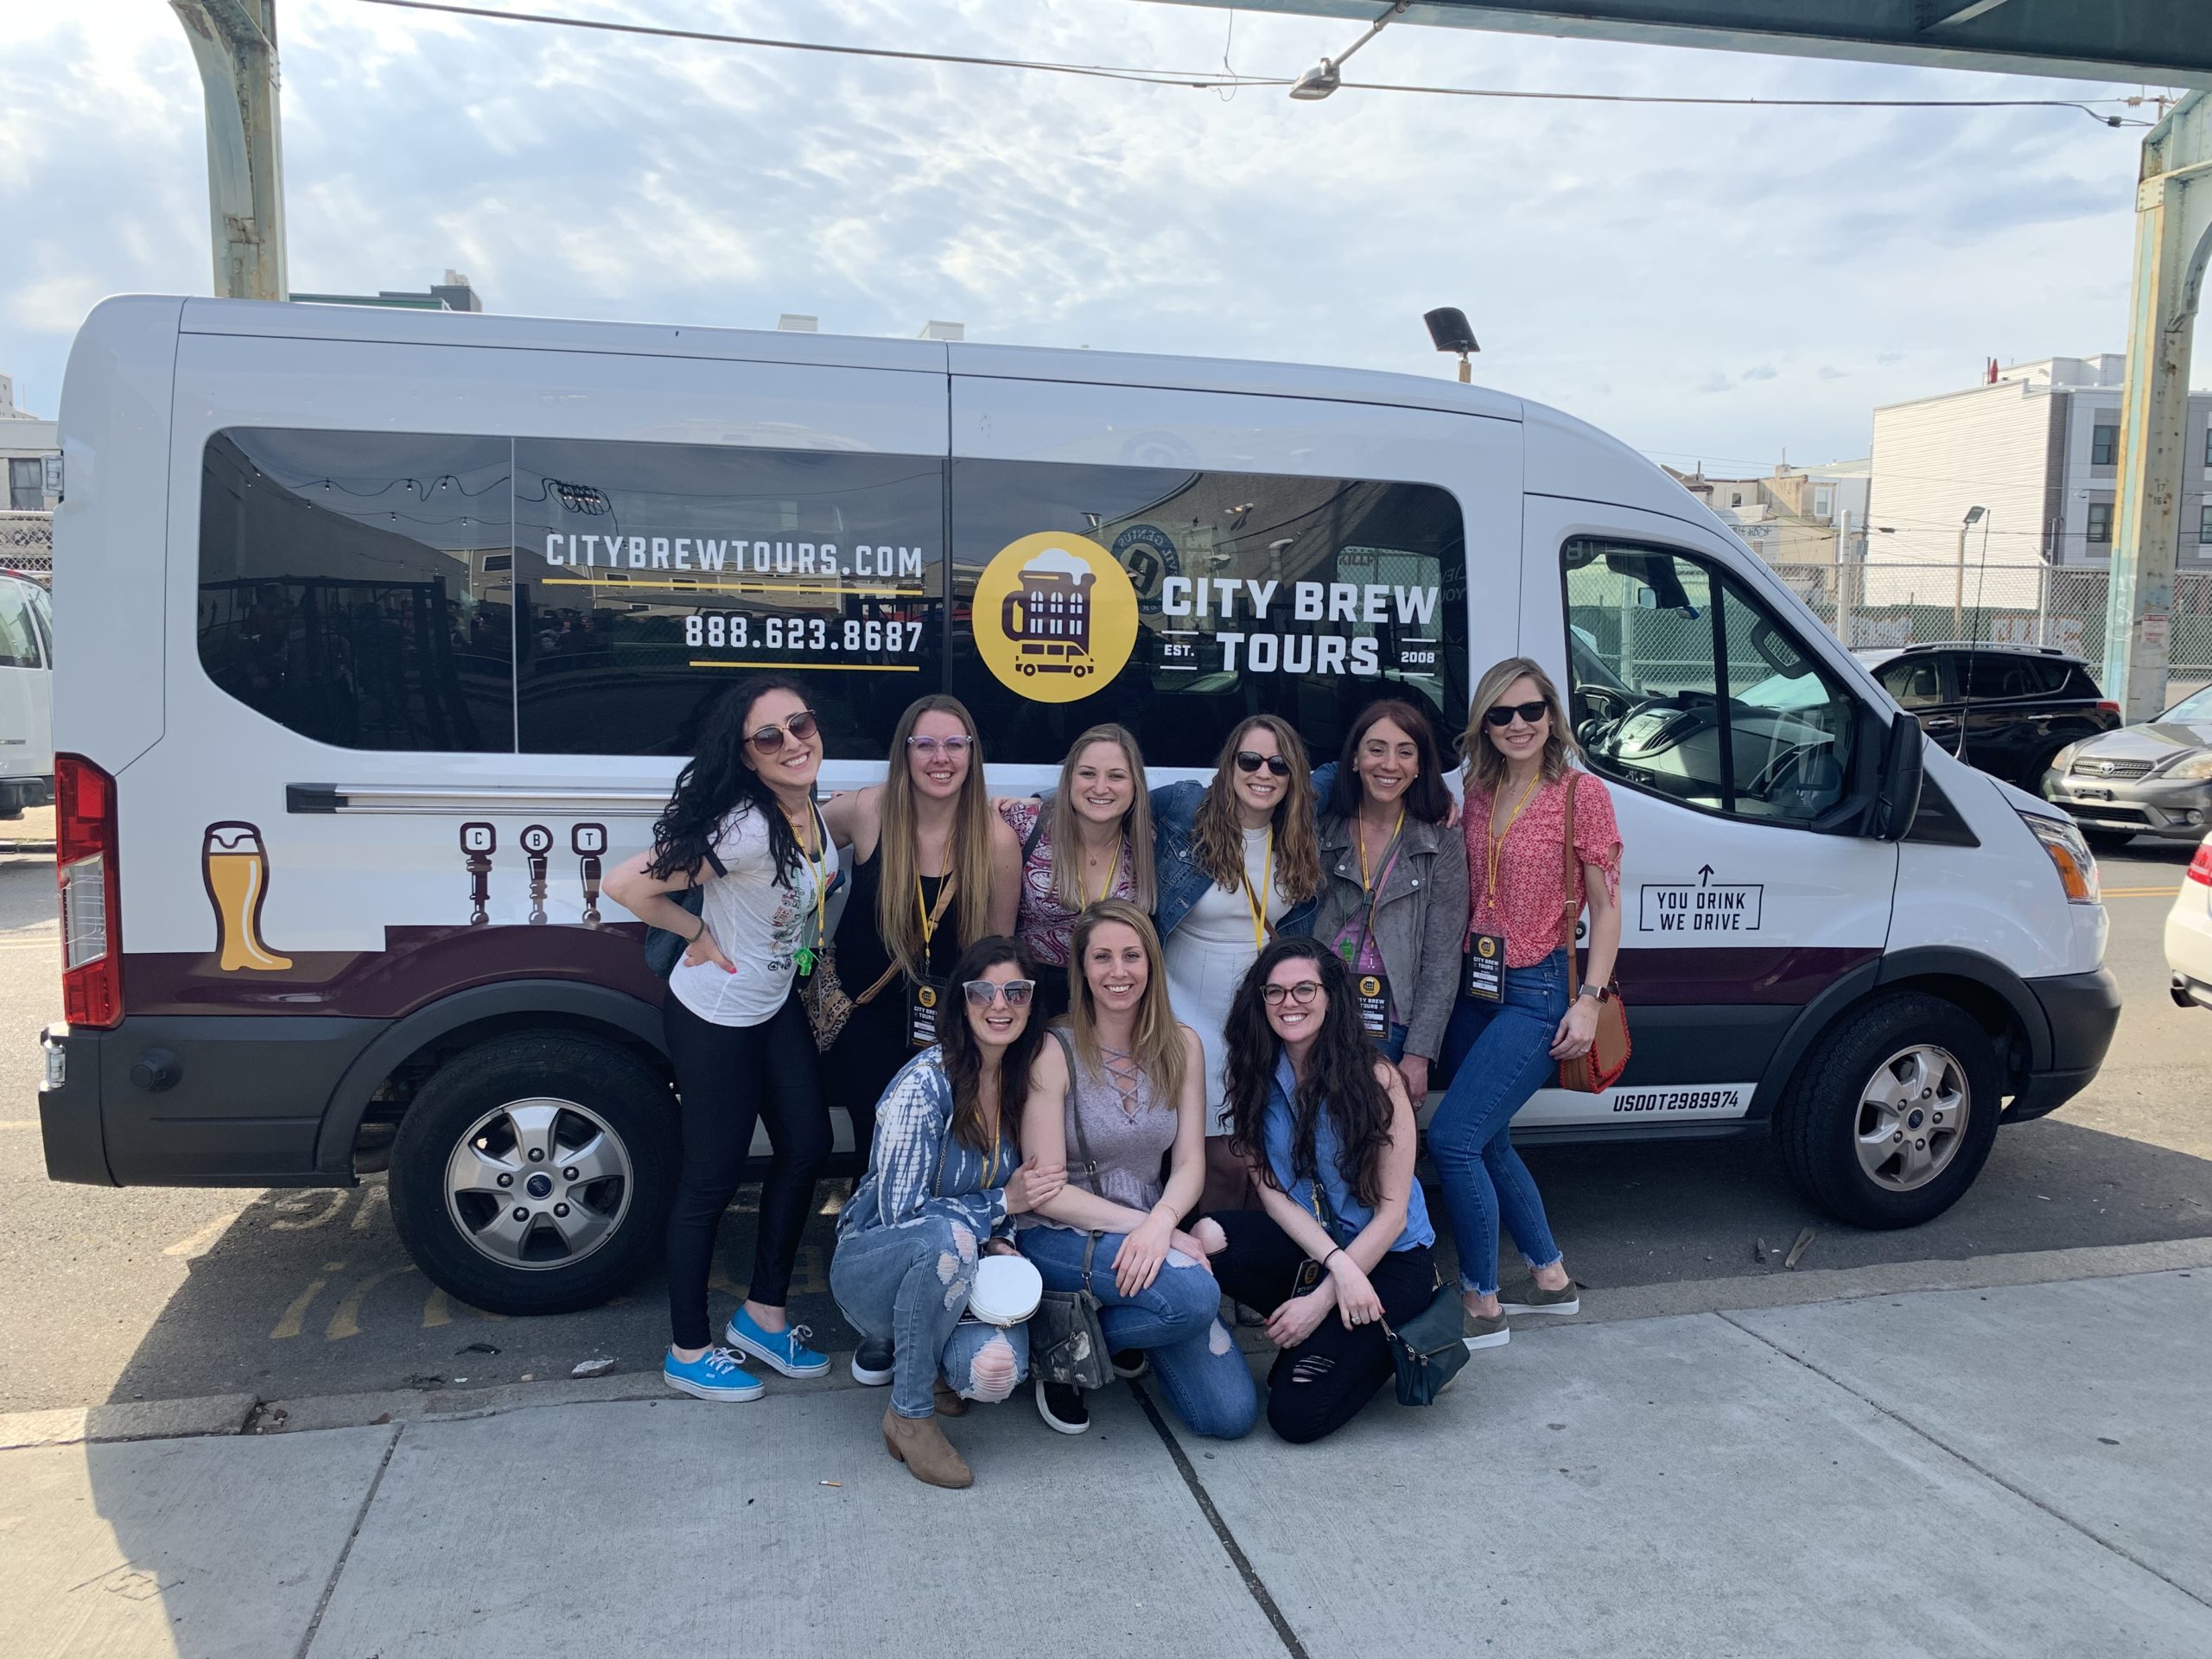 A bachelorette party poses in front of the Brew Tour van during their private tour